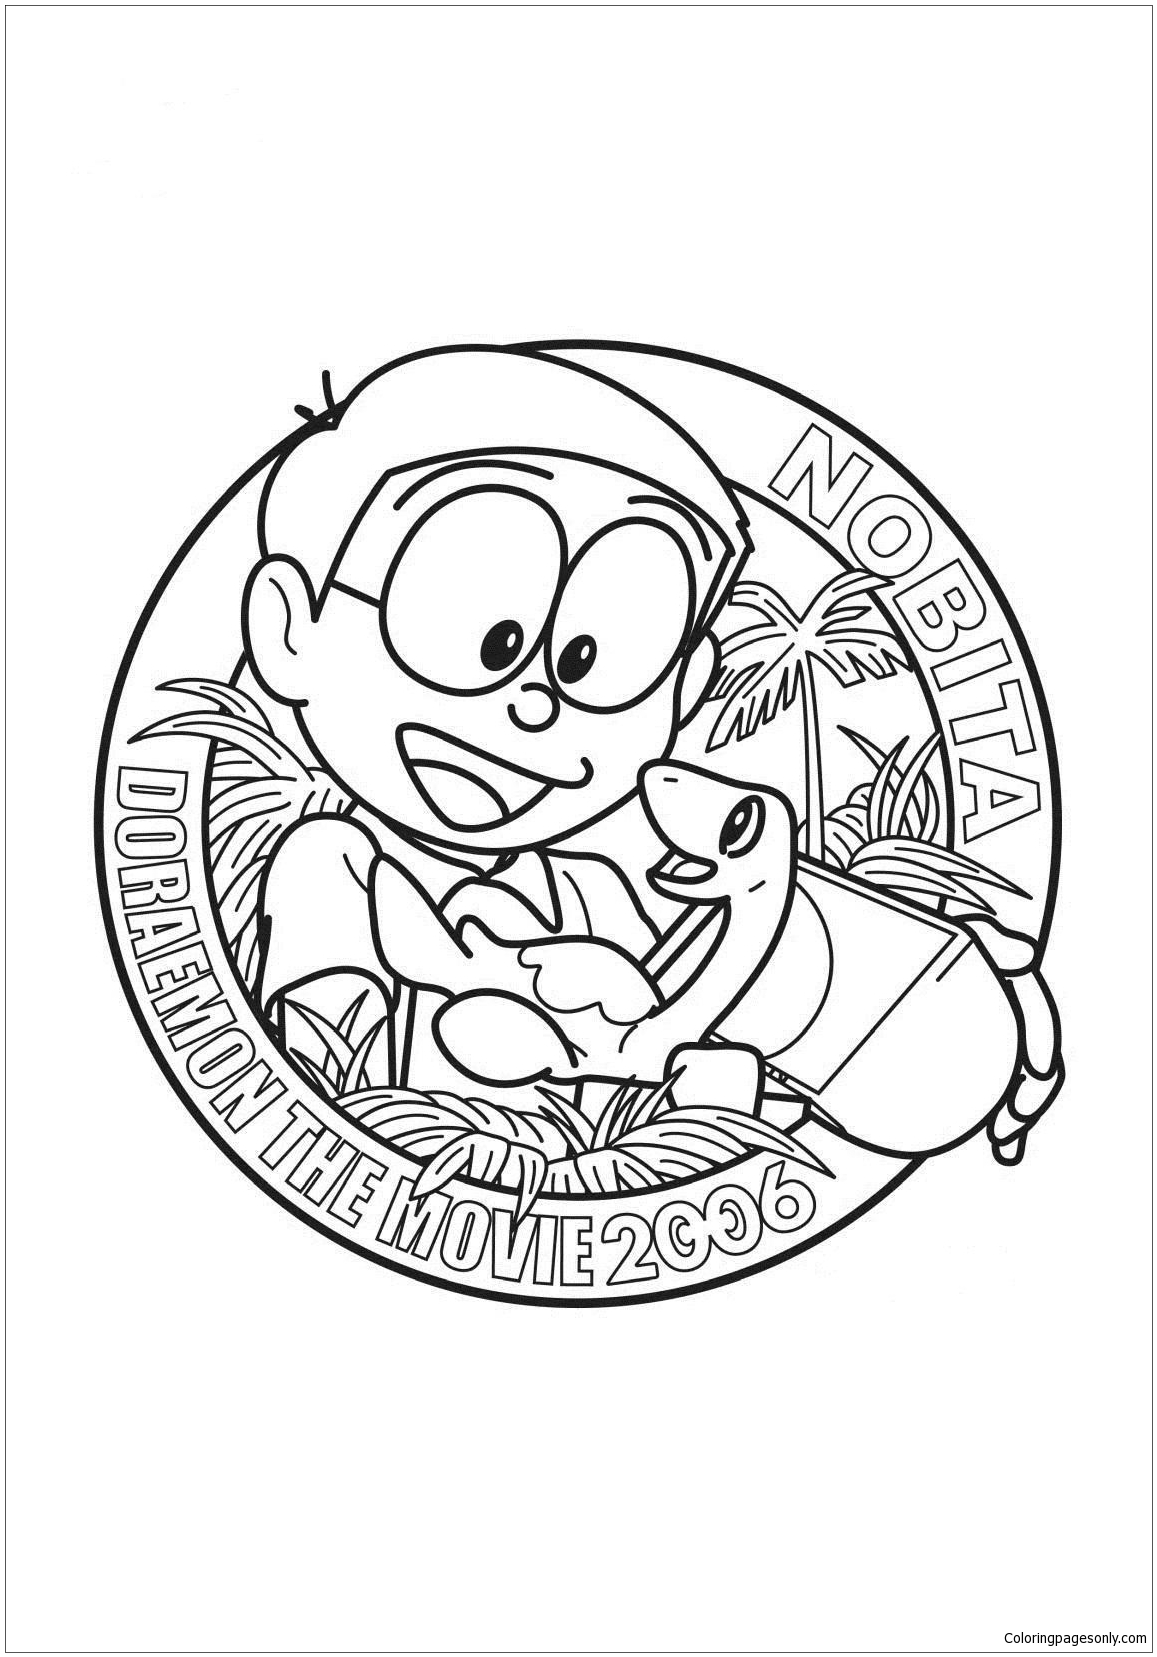 Nobita In Doraemon The Movie Coloring Page - Free Coloring Pages ...